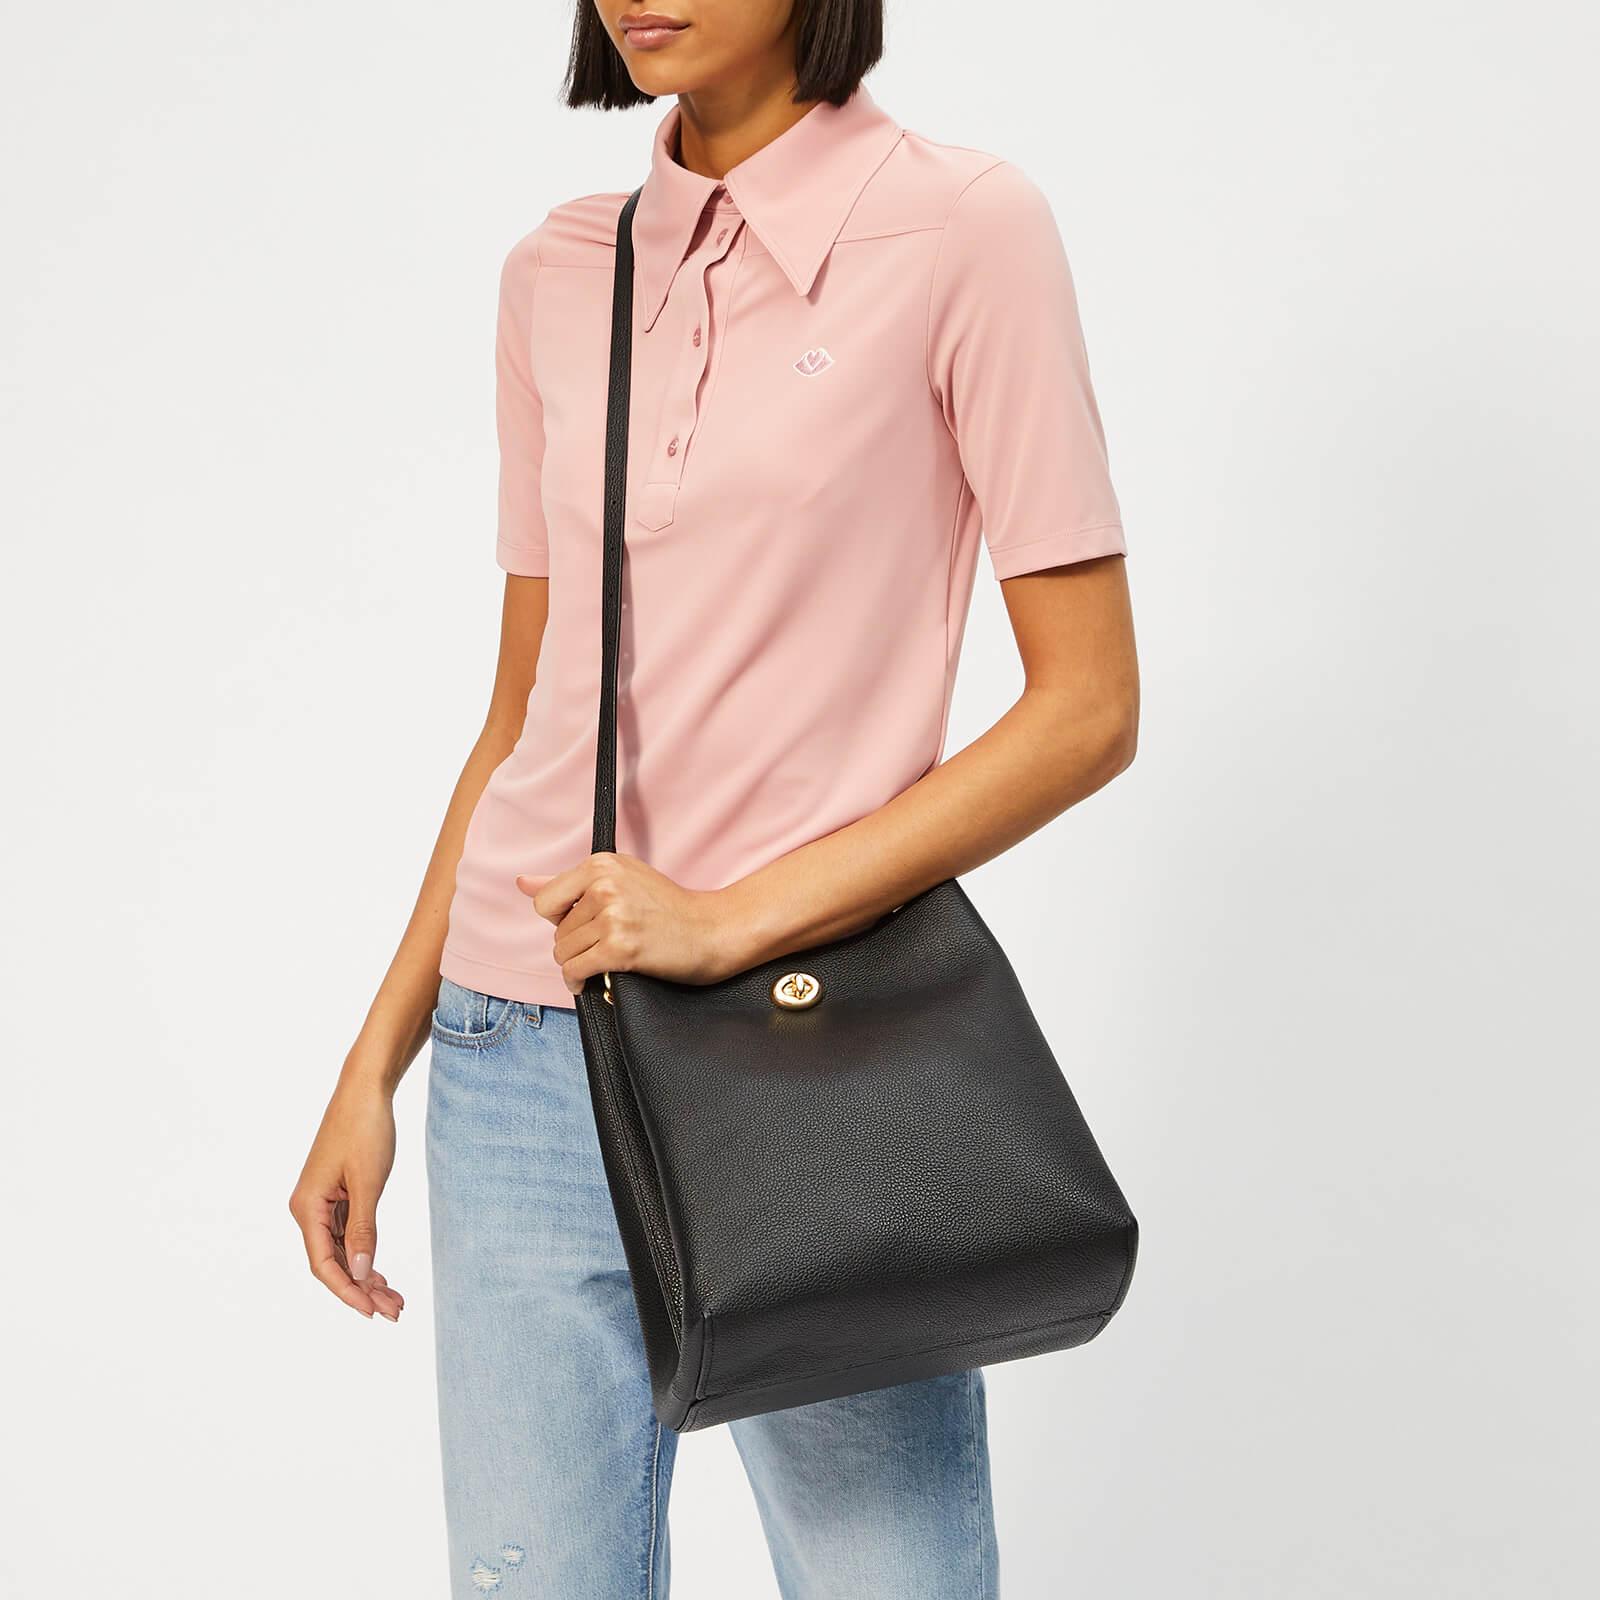 COACH Polished Pebble Leather Charlie Bucket Bag in Black - Lyst